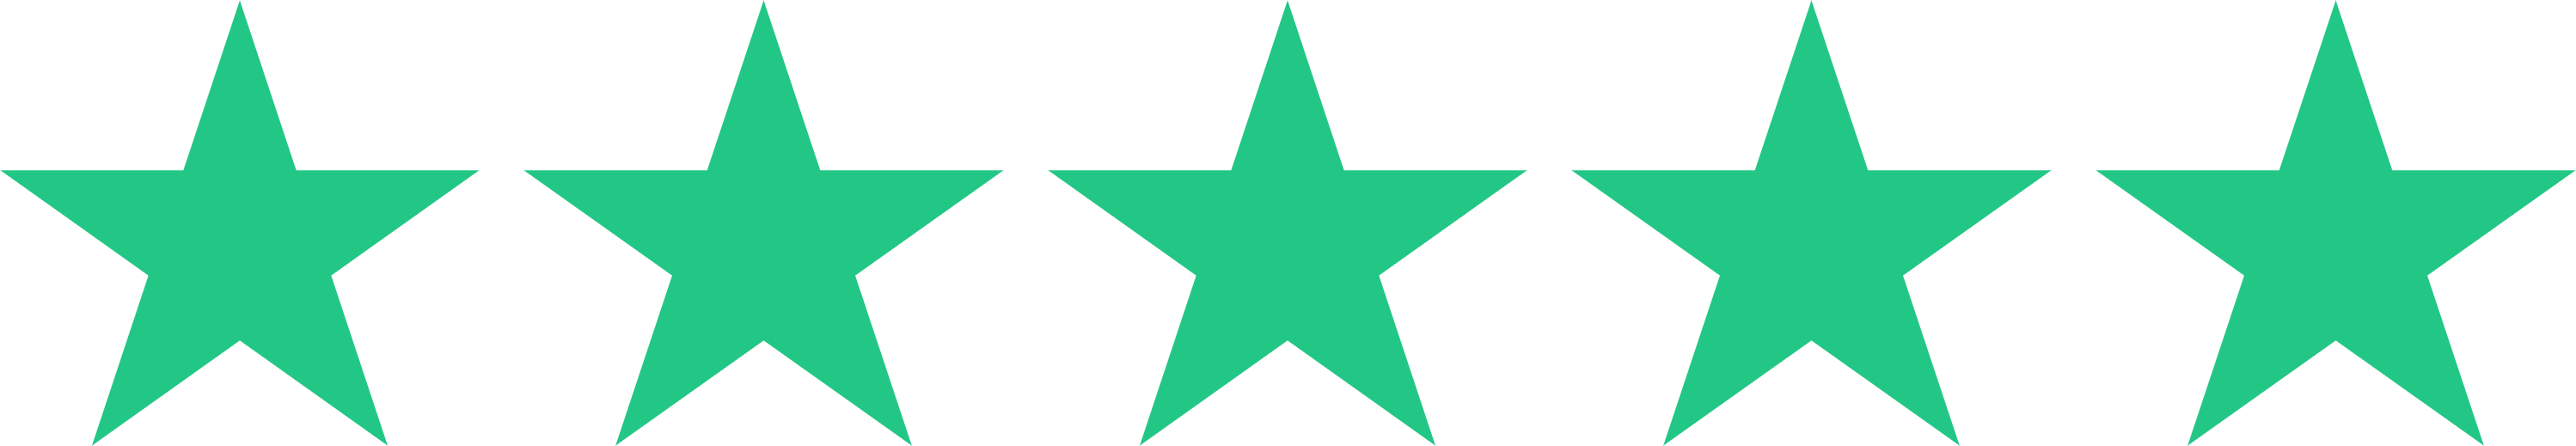 Five green stars in a row on a black background, branded as AuraPREM39.